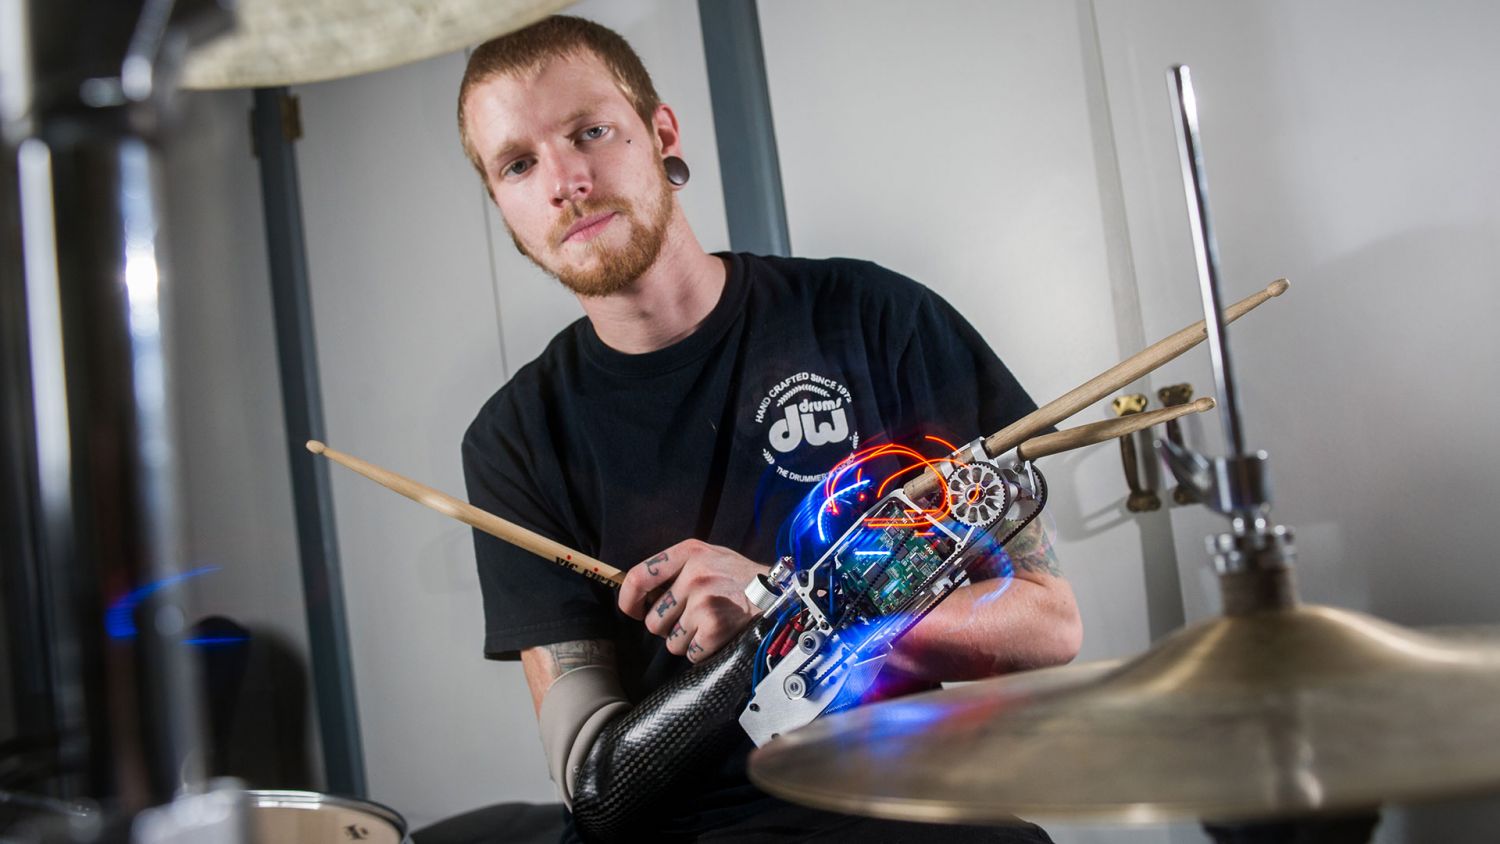 Drummer with robotic drumming arm